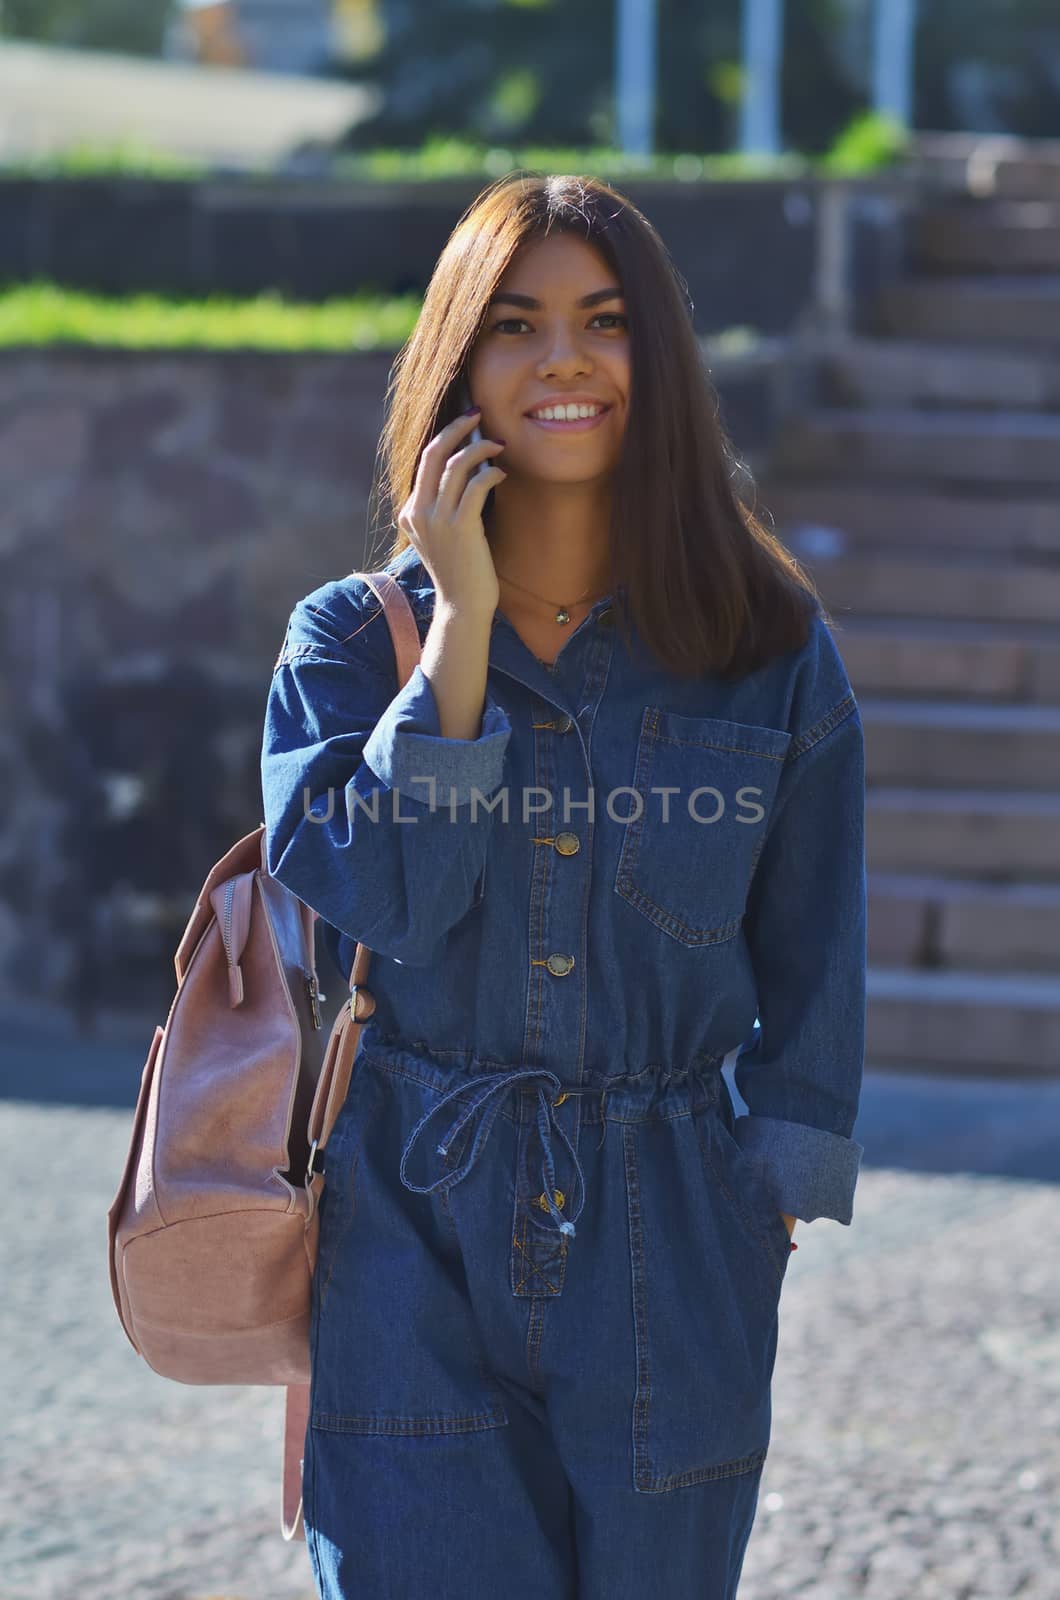 A young girl smiles, walks around the city with a pink backpack talking on the phone, dressed in a denim suit and light sneakers